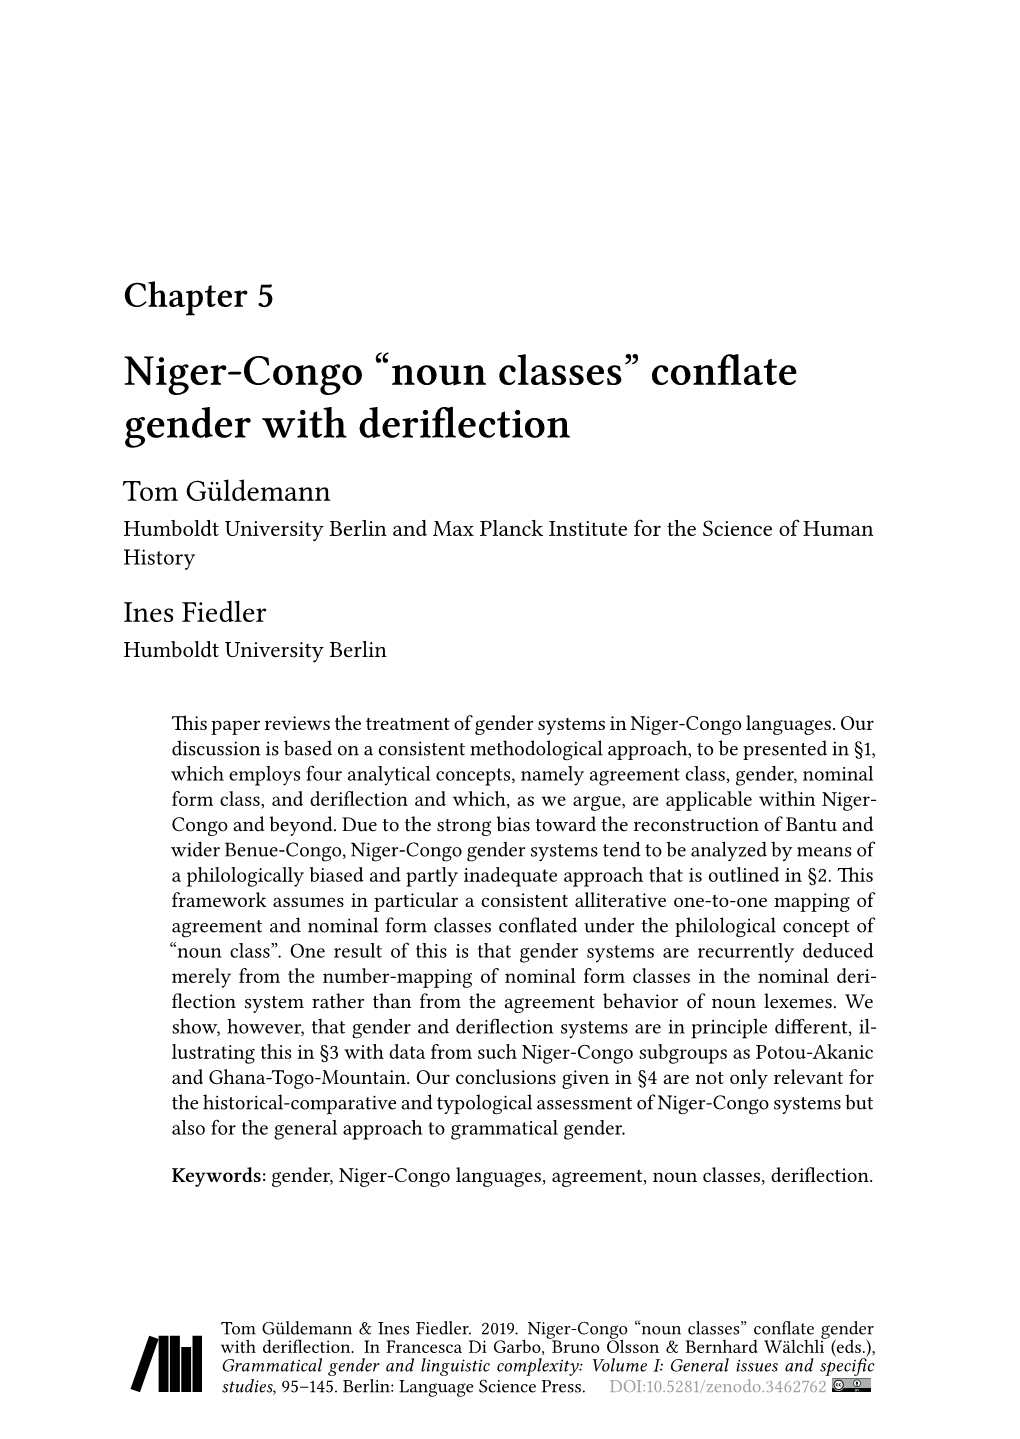 Niger-Congo “Noun Classes” Conflate Gender with Deriflection